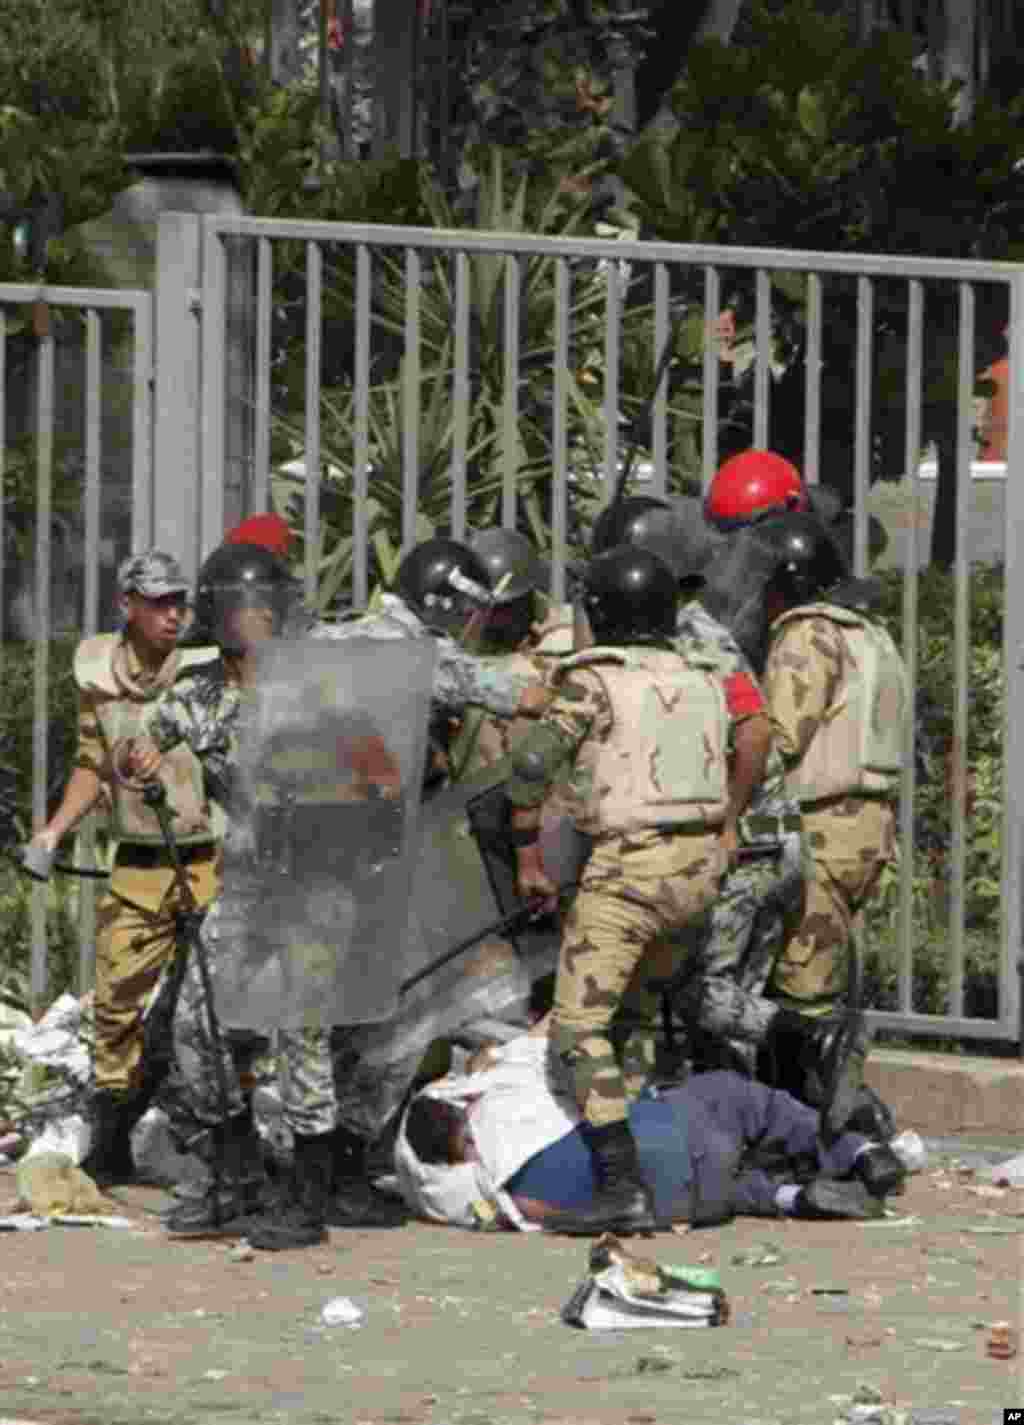 Egyptian soldiers surround a downed protester during clashes outside the Ministry of Defense in Cairo, Egypt, Friday, May 4, 2012. Egyptian armed forces and protesters clashed in Cairo on Friday, with troops firing water cannons and tear gas at demonstrat